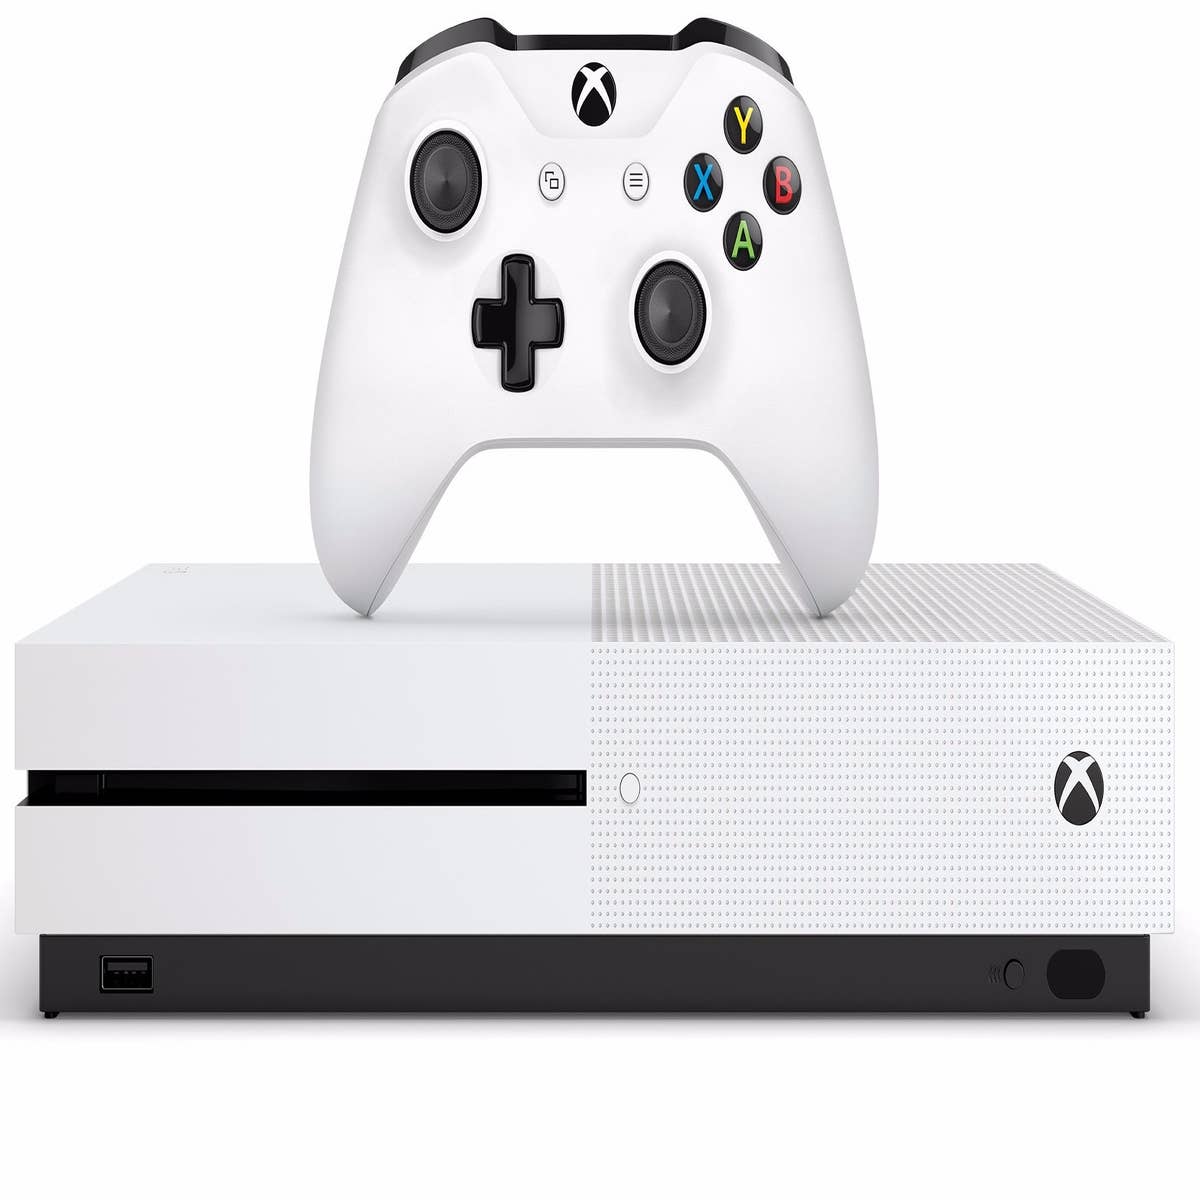 Xbox One: Hardware and software specs detailed and analyzed